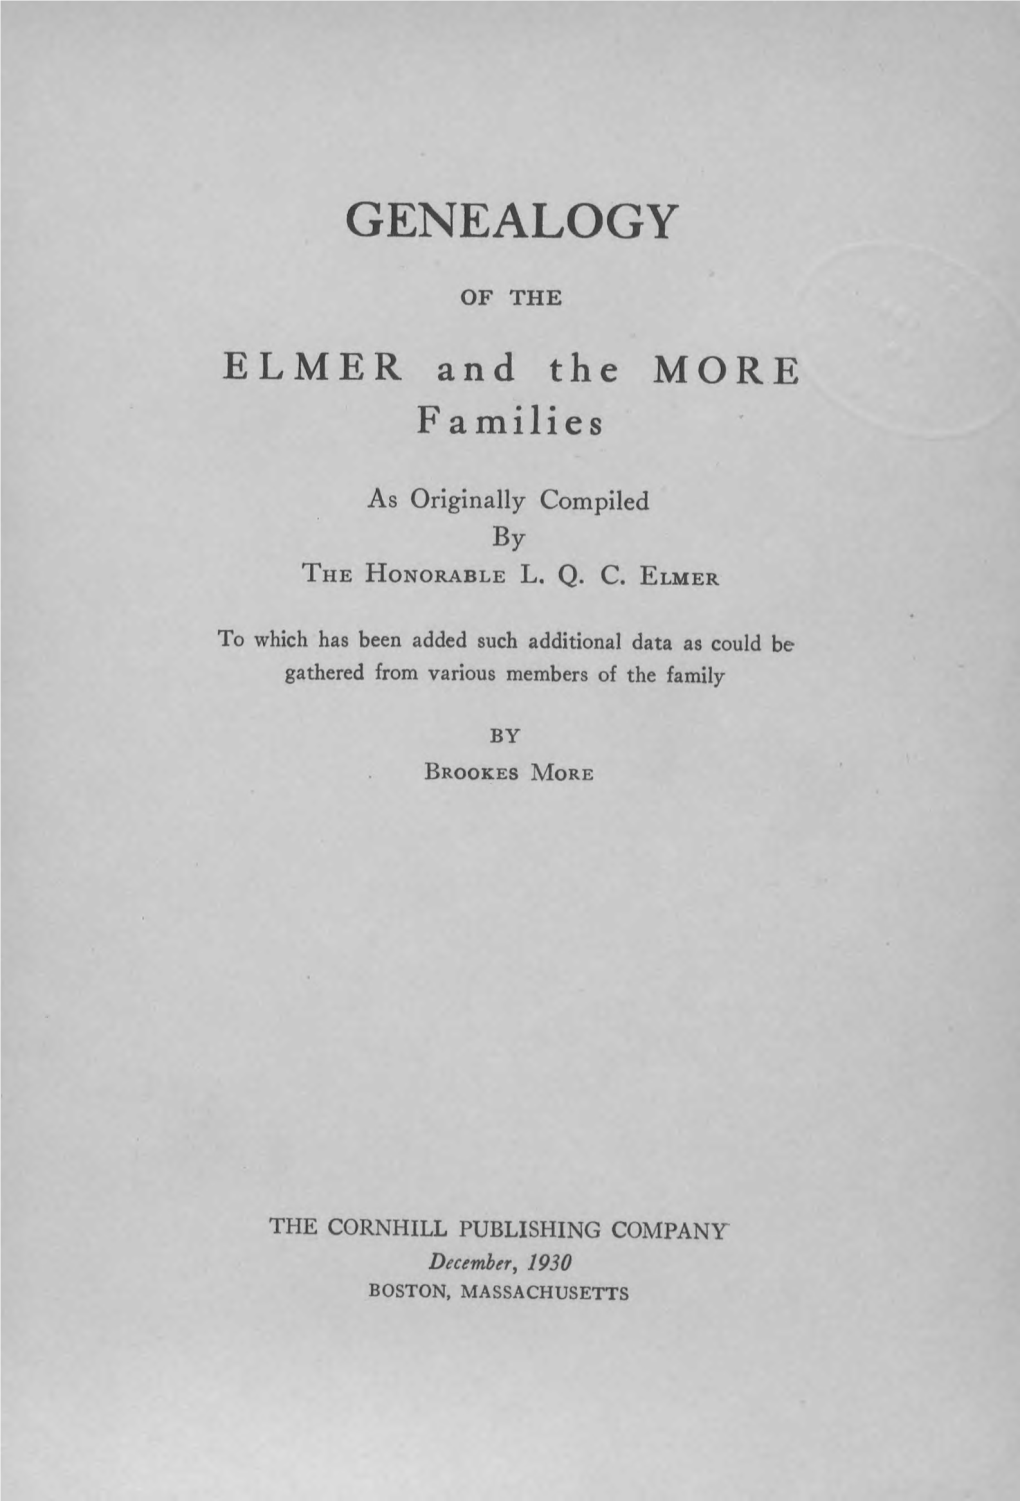 Genealogy of the Elmer and the More Families